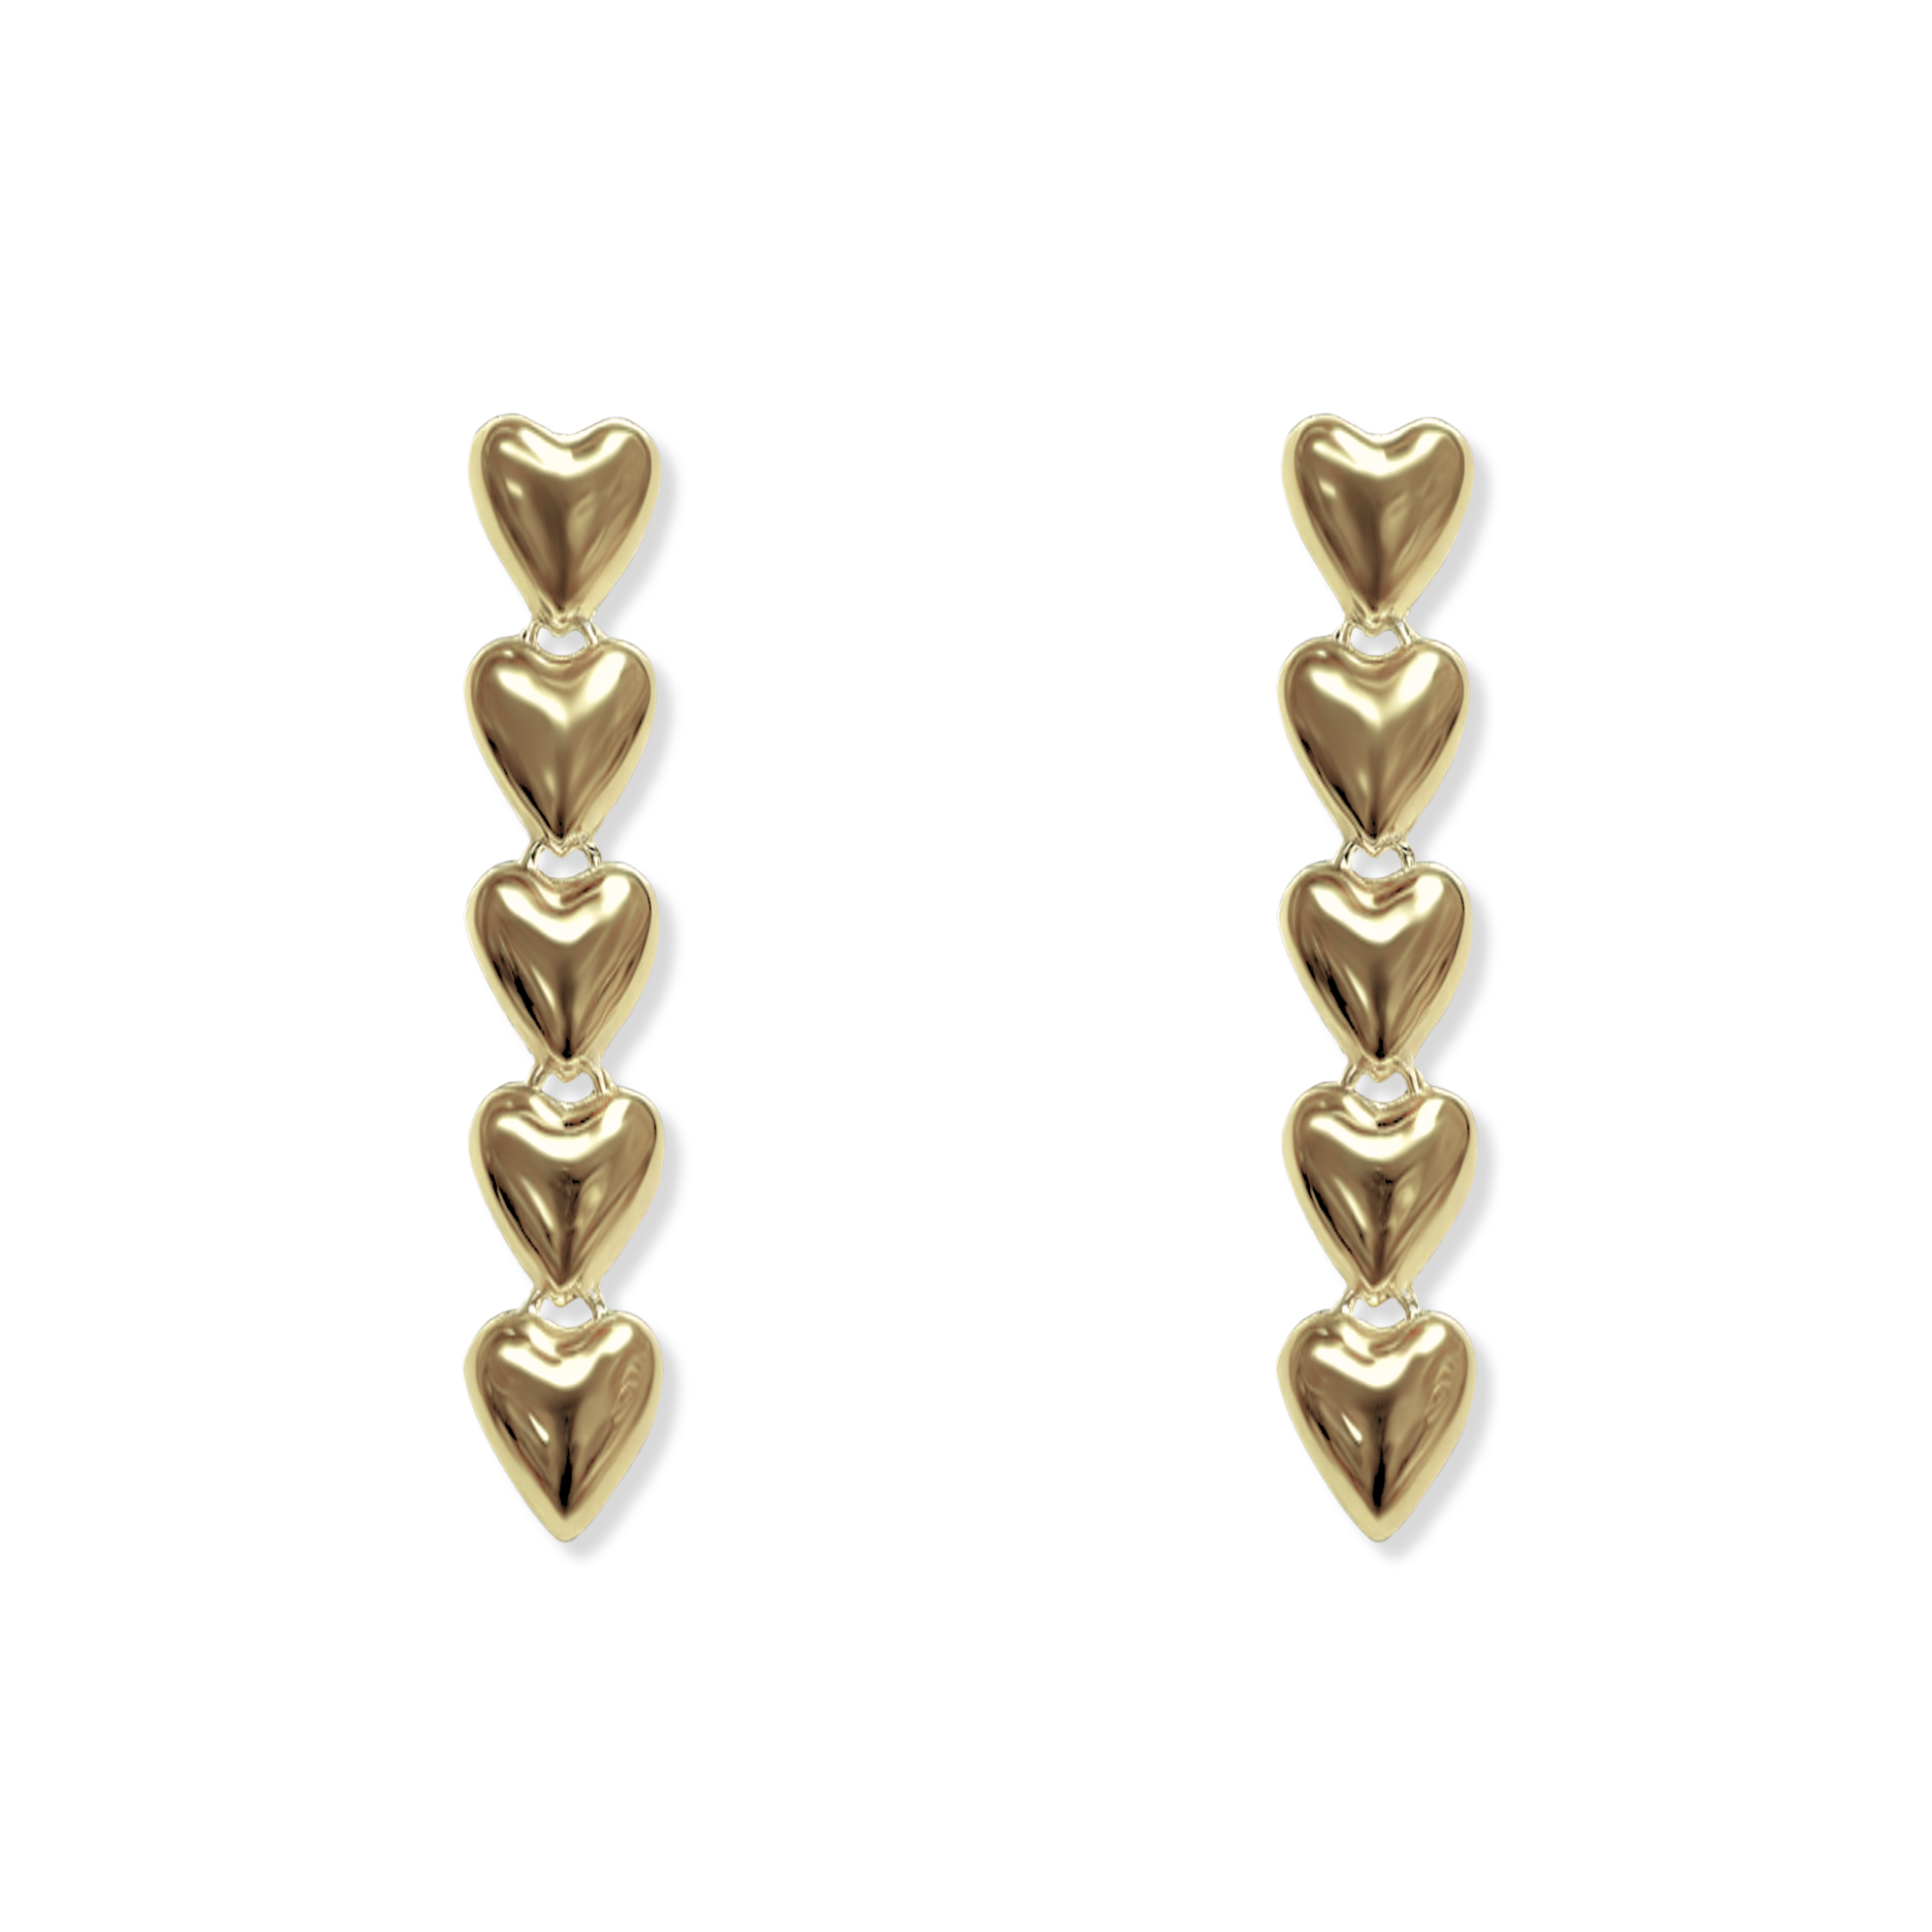 THE AMOUR DROP EARRING